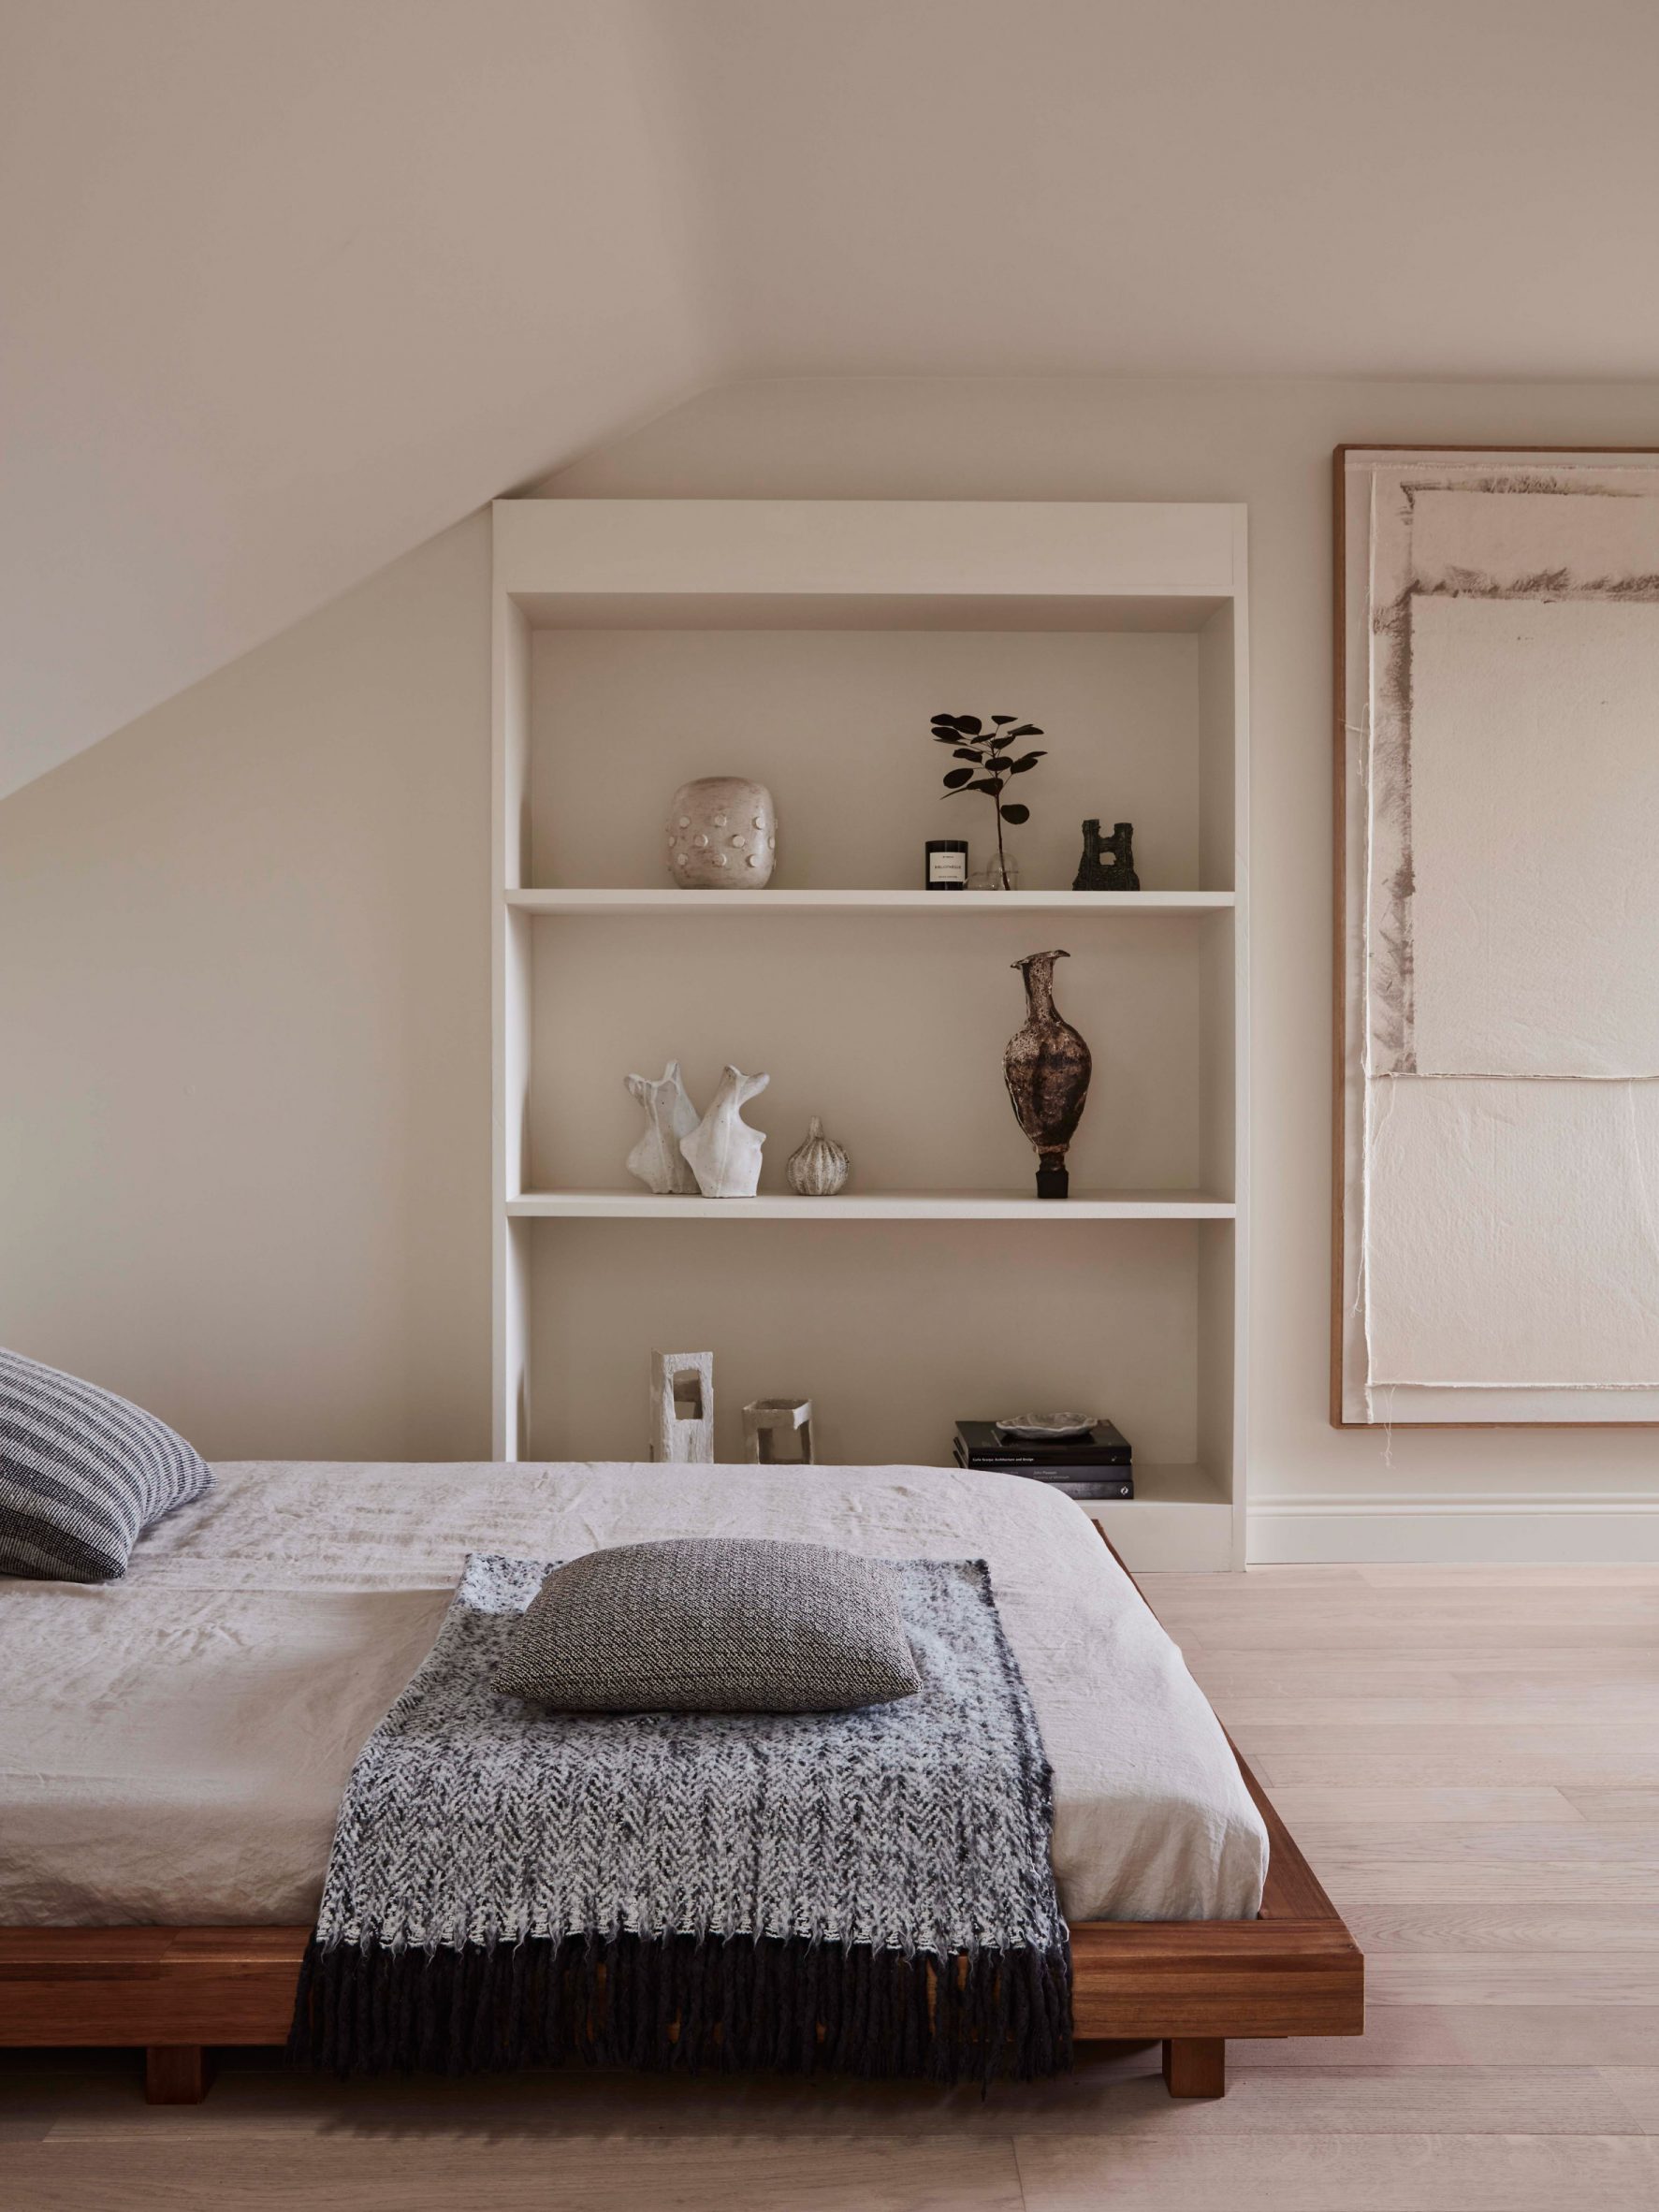 Bedroom interior by Daytrip with low timber bed and white shelving